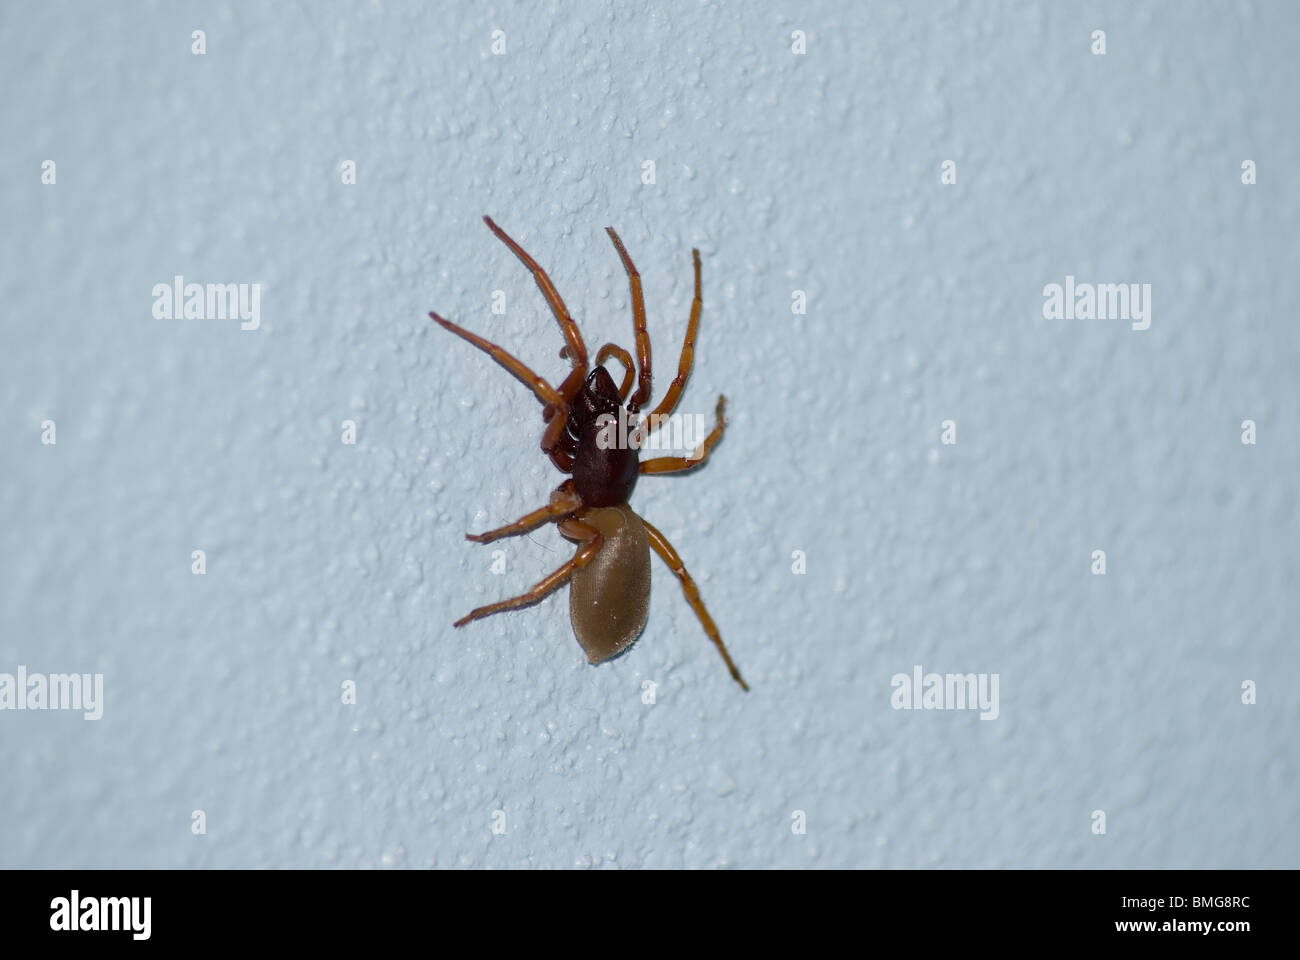 Wood louse eating spider on wall Stock Photo